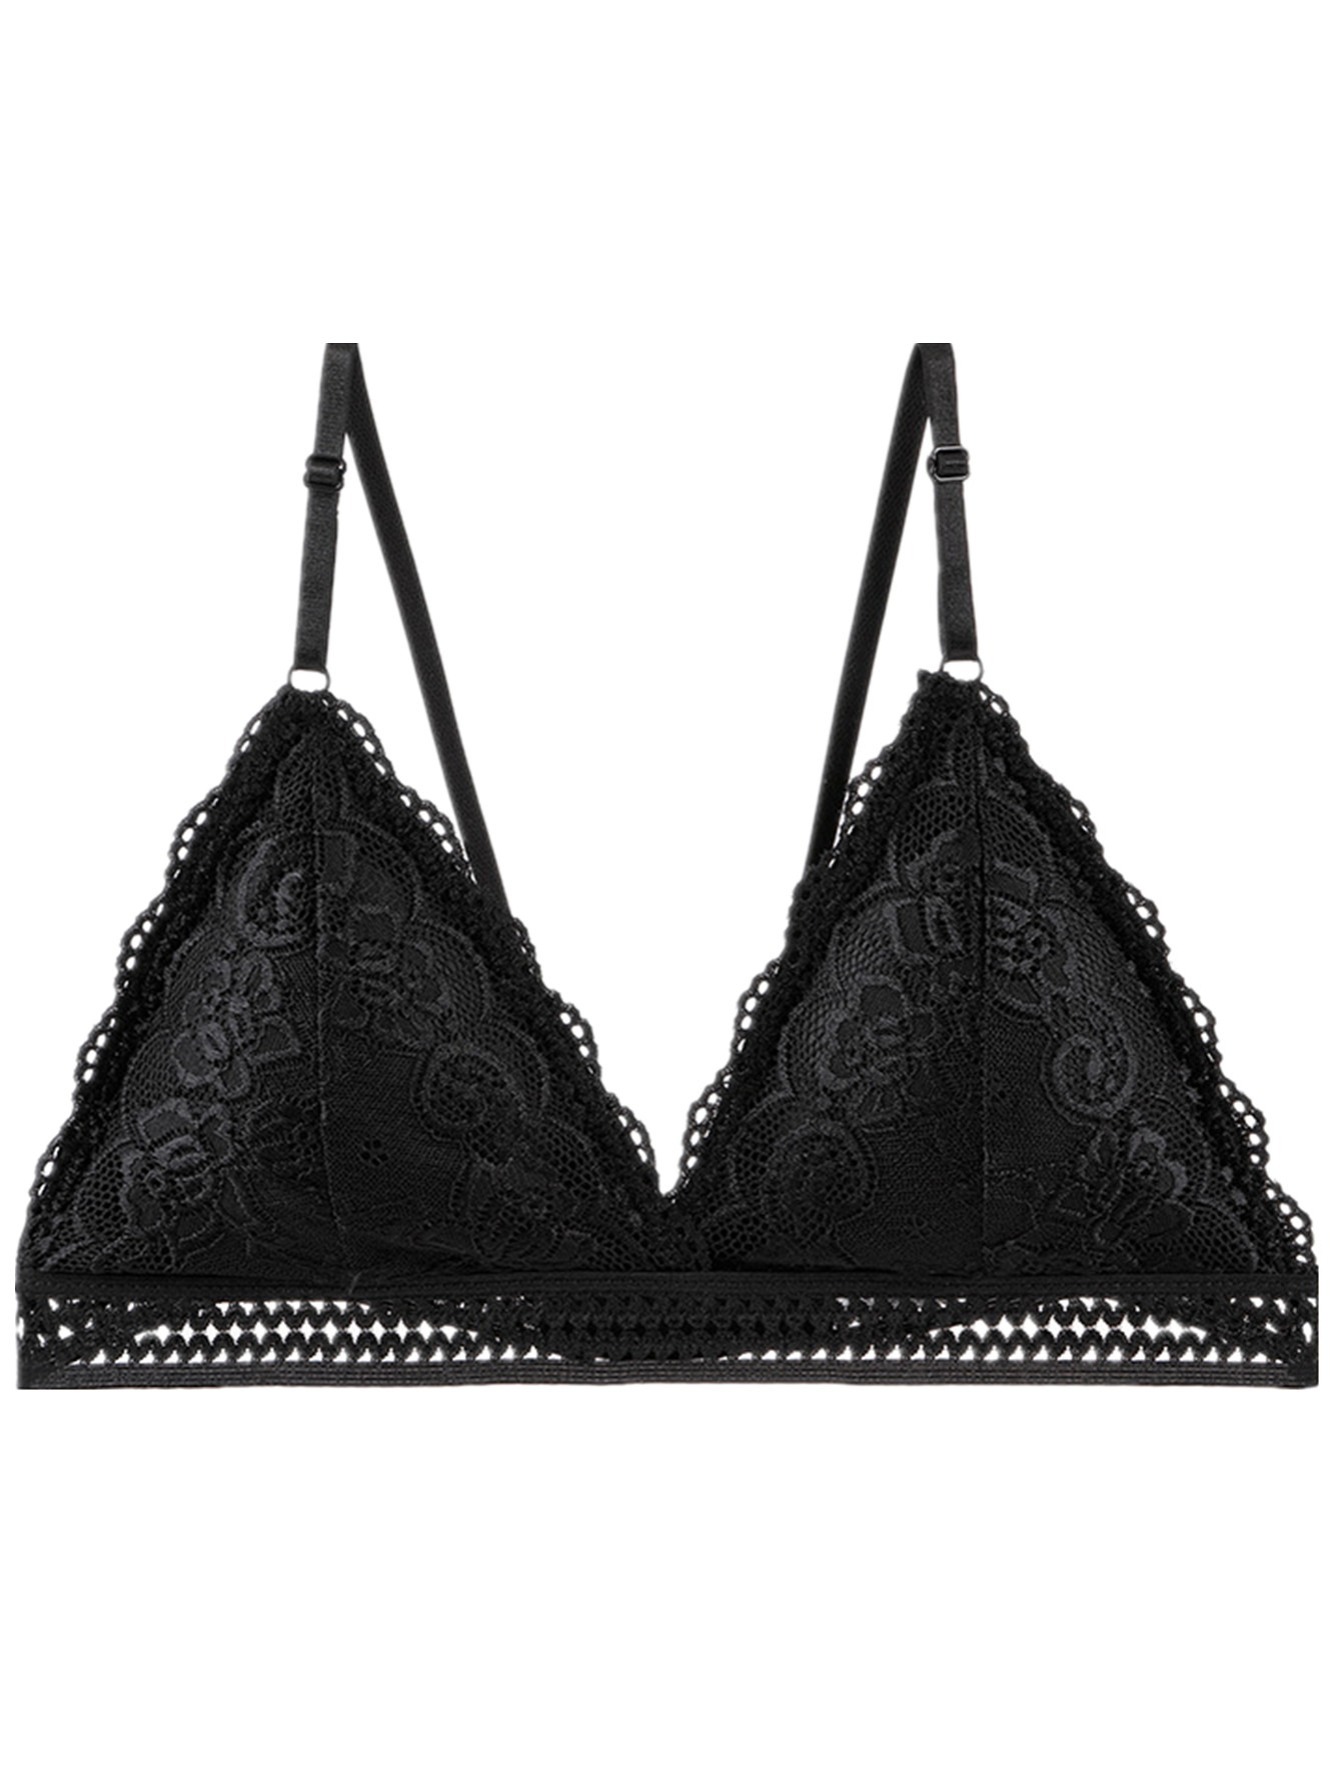 30FF Cup Size Bras  Lace Triangle Padded Push Up Luxury Designer